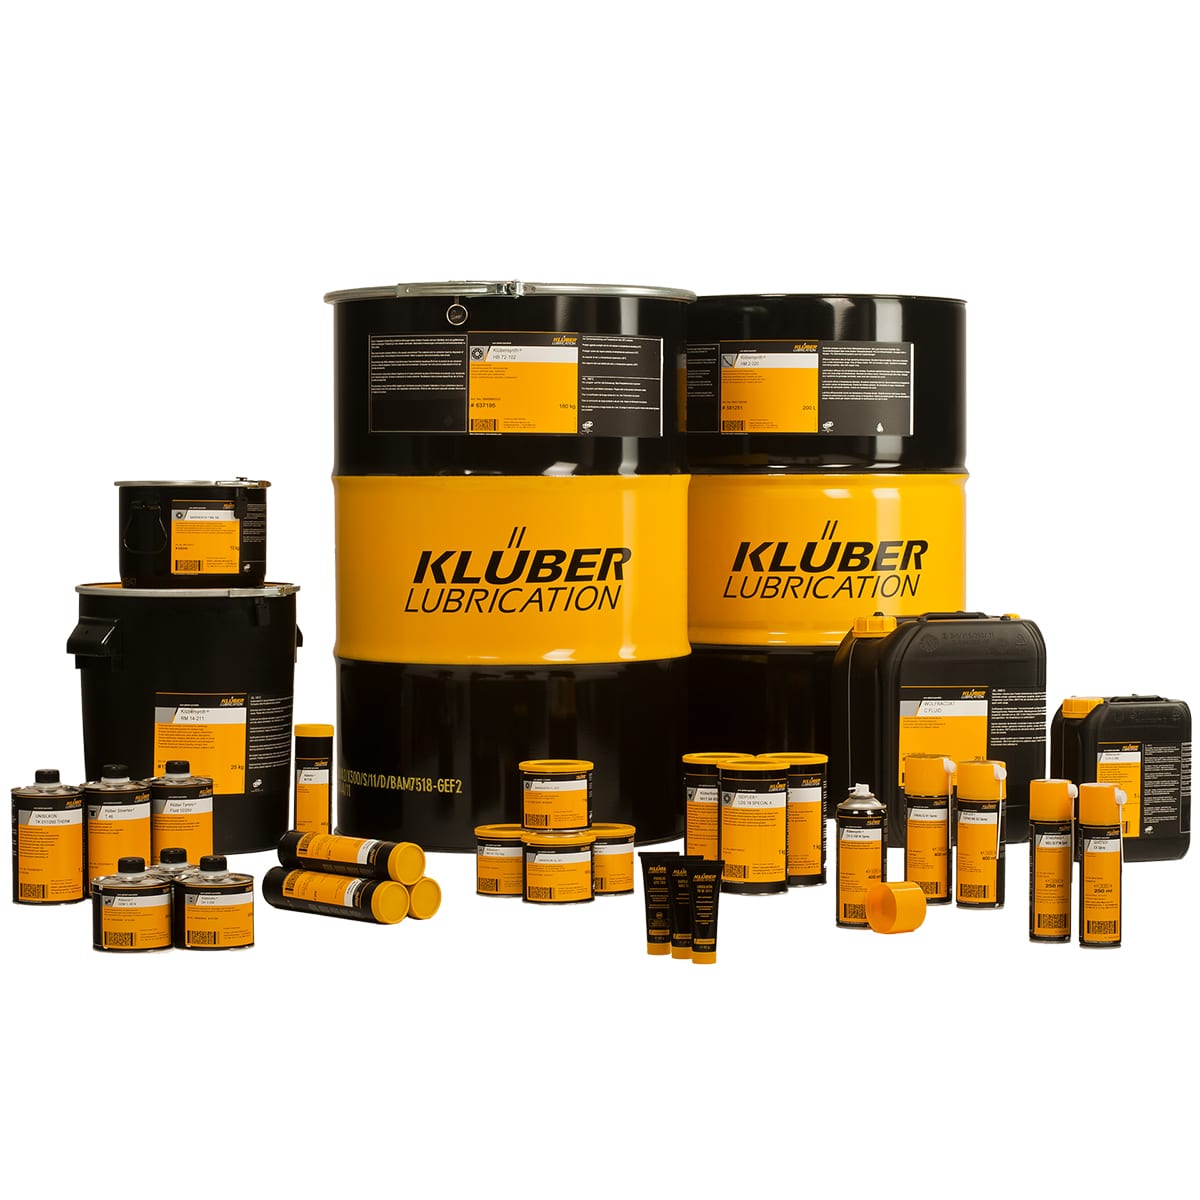 Details about   Kluber Nontrop KR291 Lubricating Grease 1Kg Can Precision Gears Bearing Spindle 